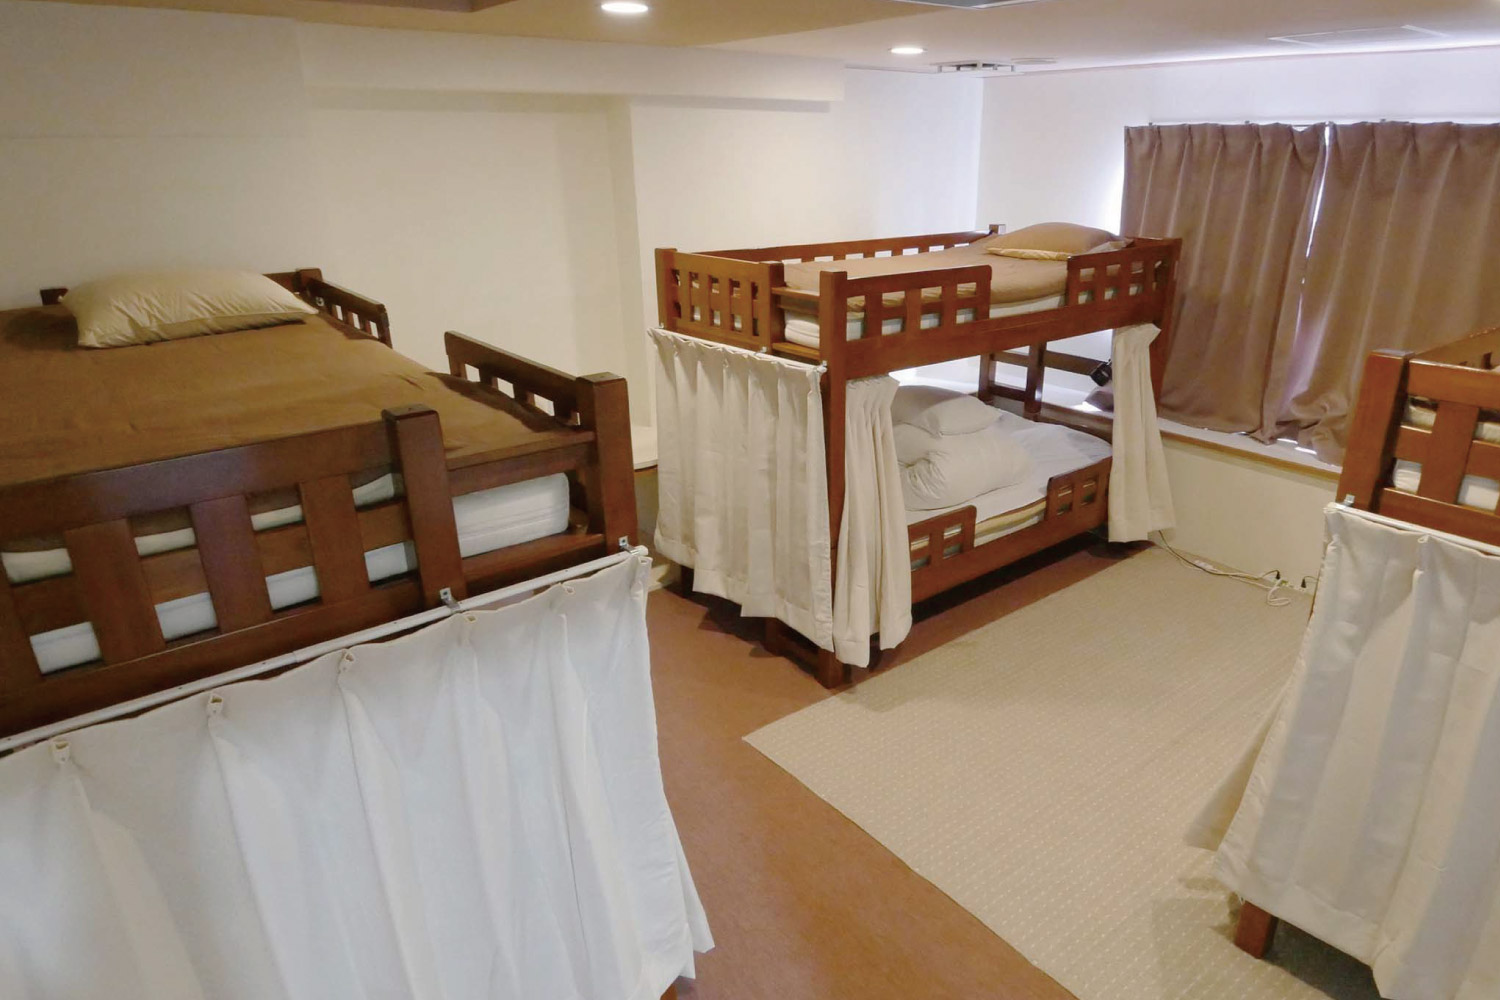 6-Bed Male Dormitory Room